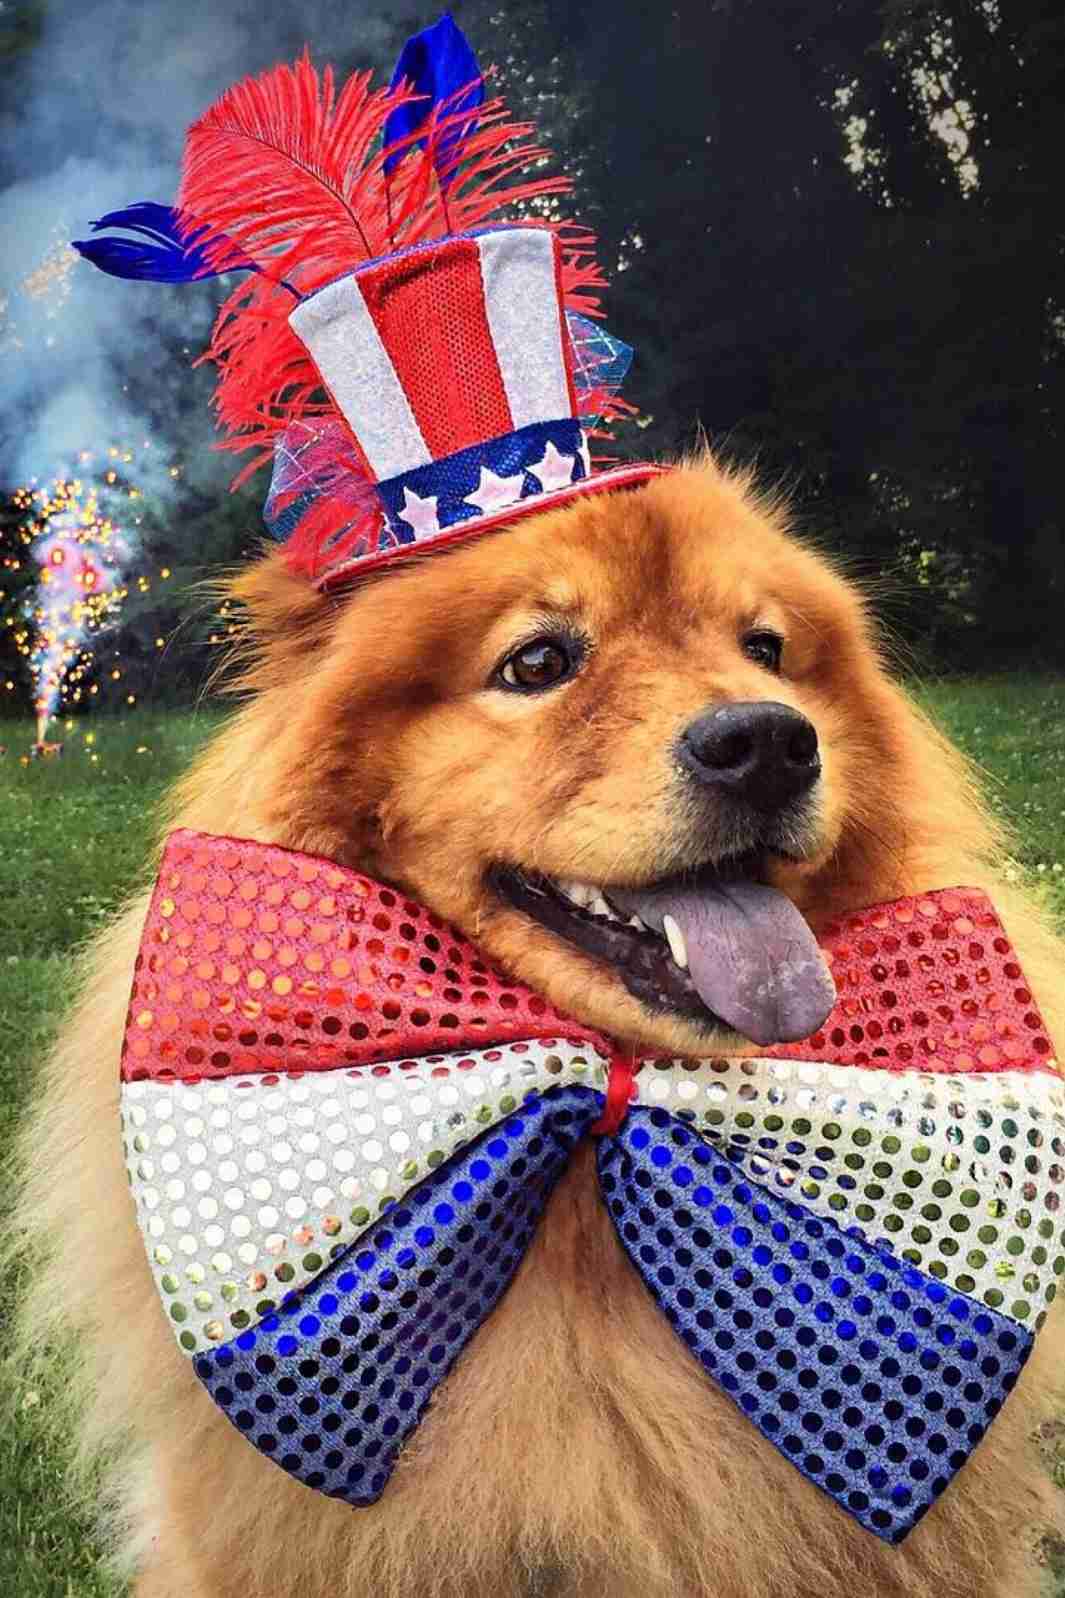 Celebrate 2020 Top Ten Fourth of July and Independence Day Costumes for Dogs with the Cutest Chow Chow Influencer on Instagram @izzy_the_chow.